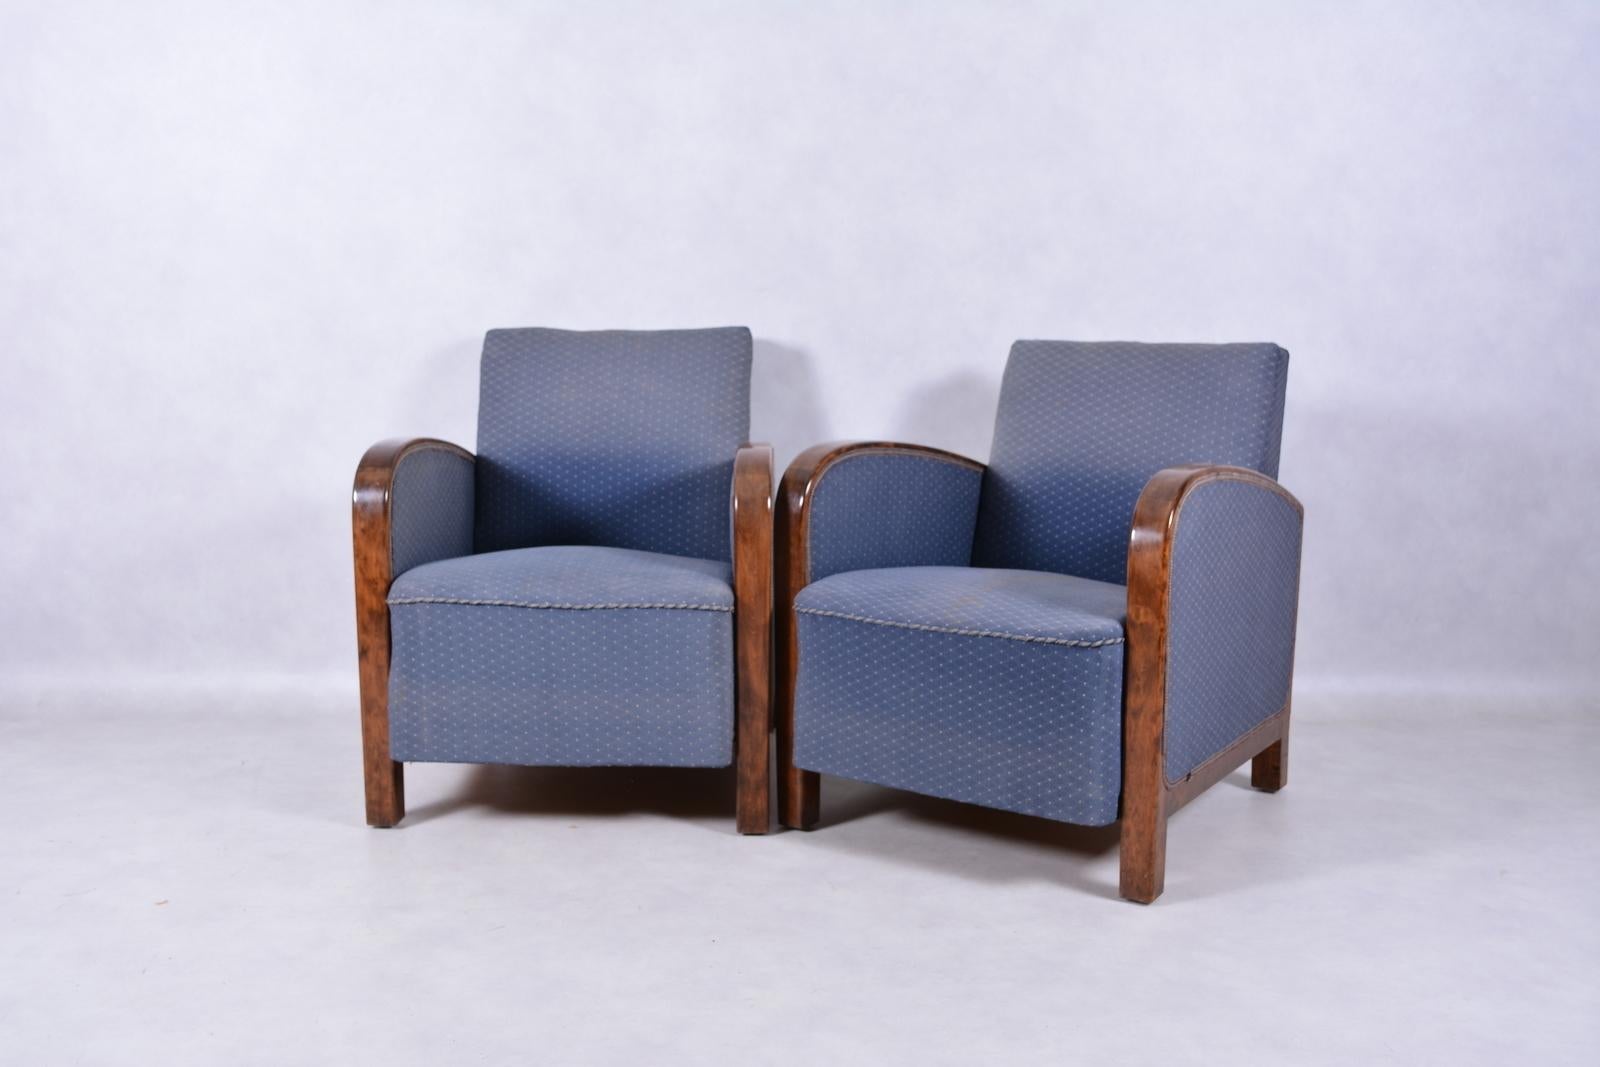 ONE YEAR ANNIVERSARY SALE! As a thank you for a great 1st year!   Very comfortable and beautiful period Art Deco armchairs. Wood in excellent vintage condition with deep patina but can be refinished upon request. Re-upholstery can be provided upon